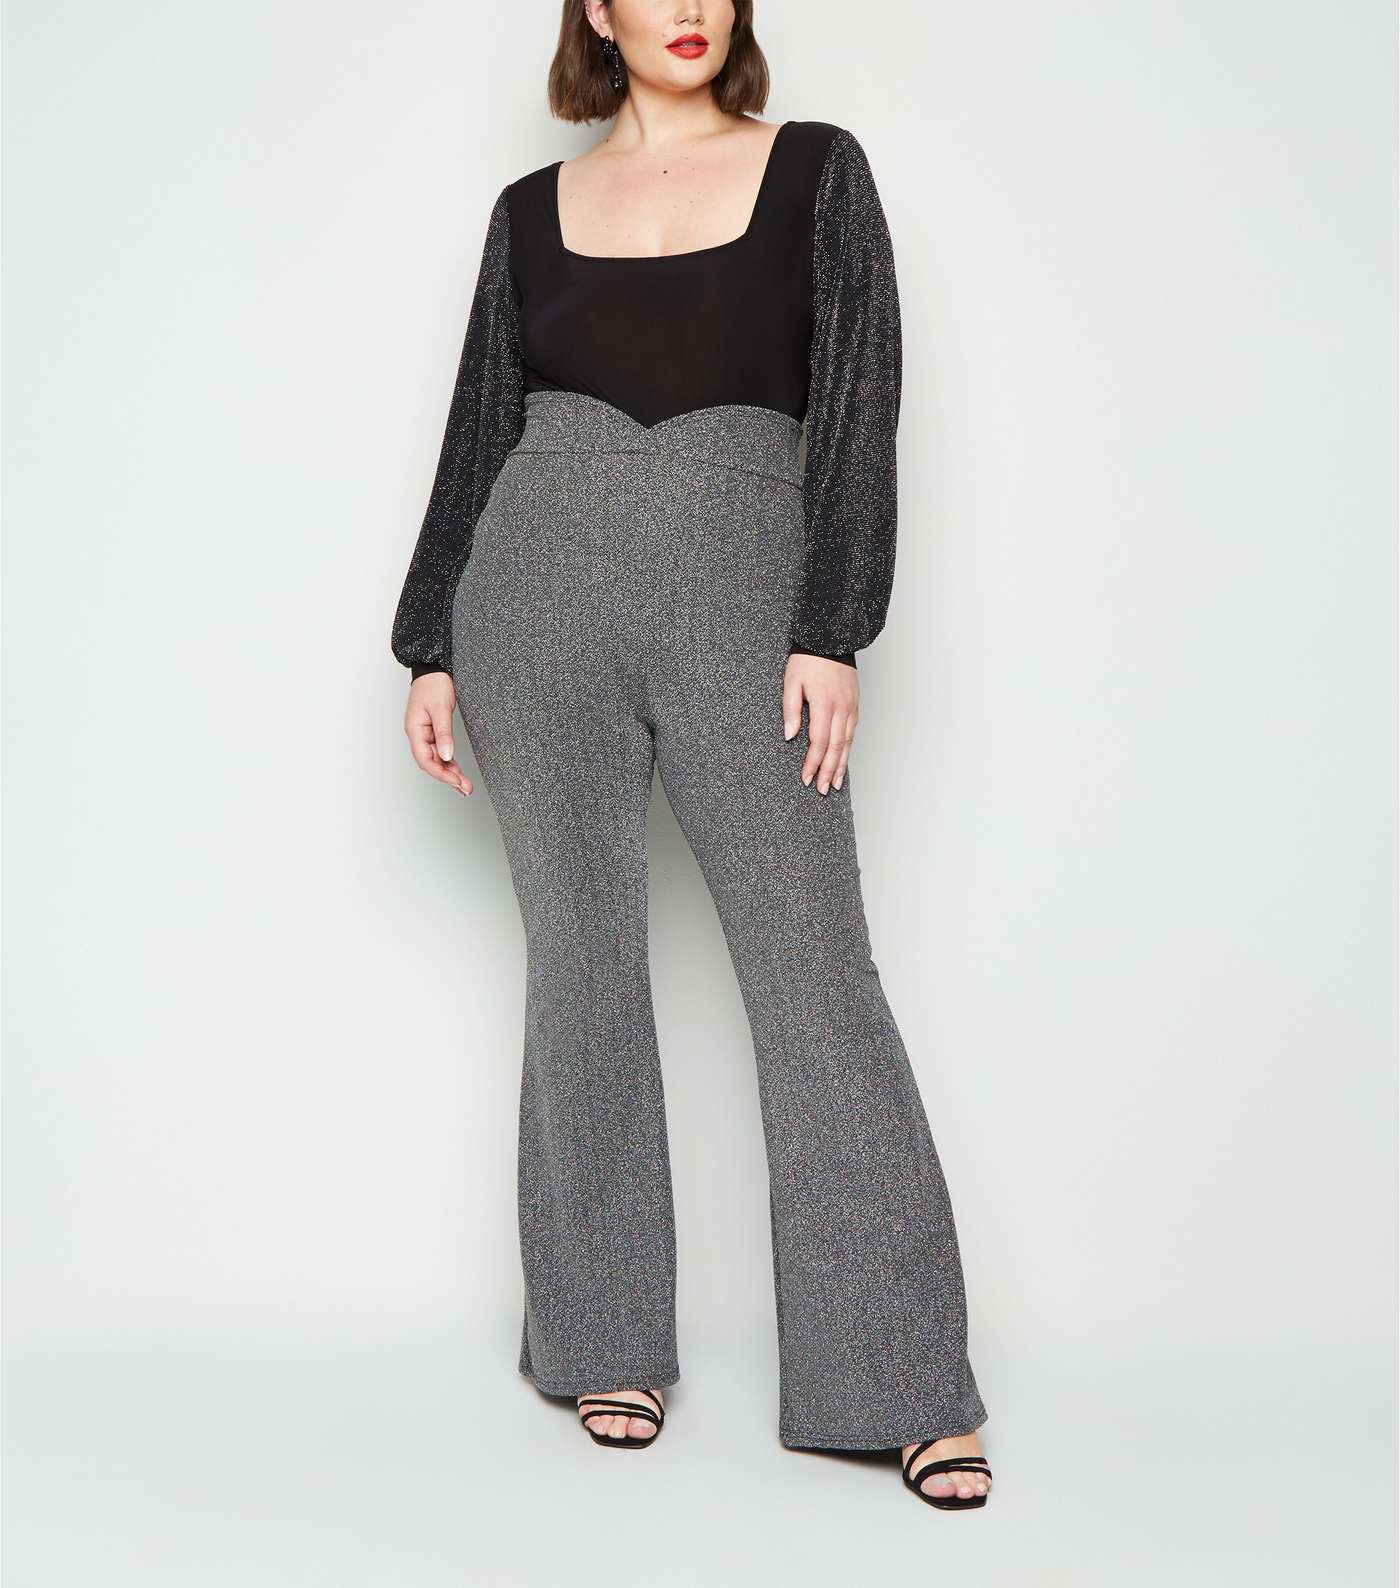 Just Curvy Black Shimmer Flared Trousers